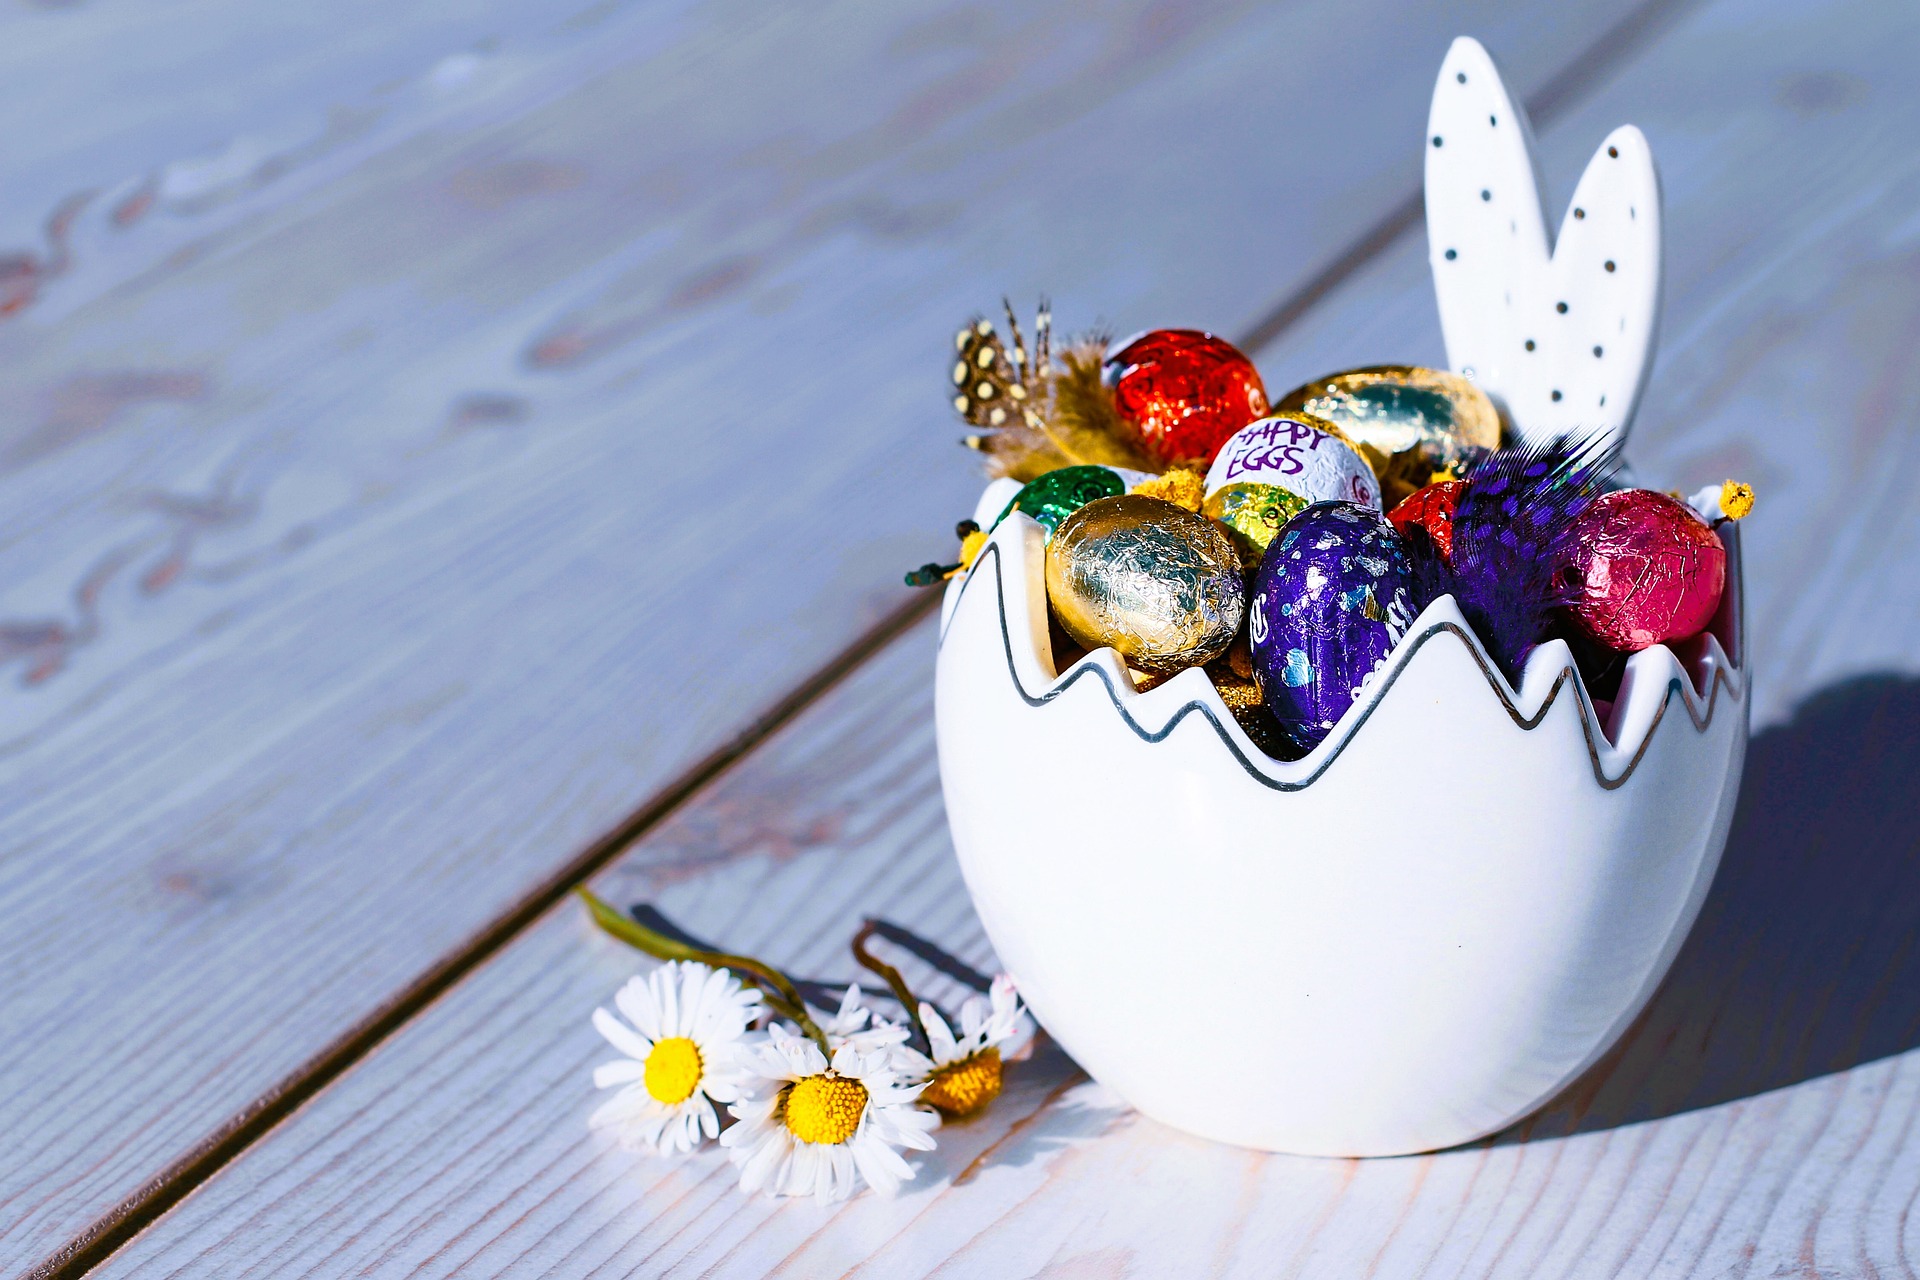 small foil Easter eggs in bunny bowl next to daisies.